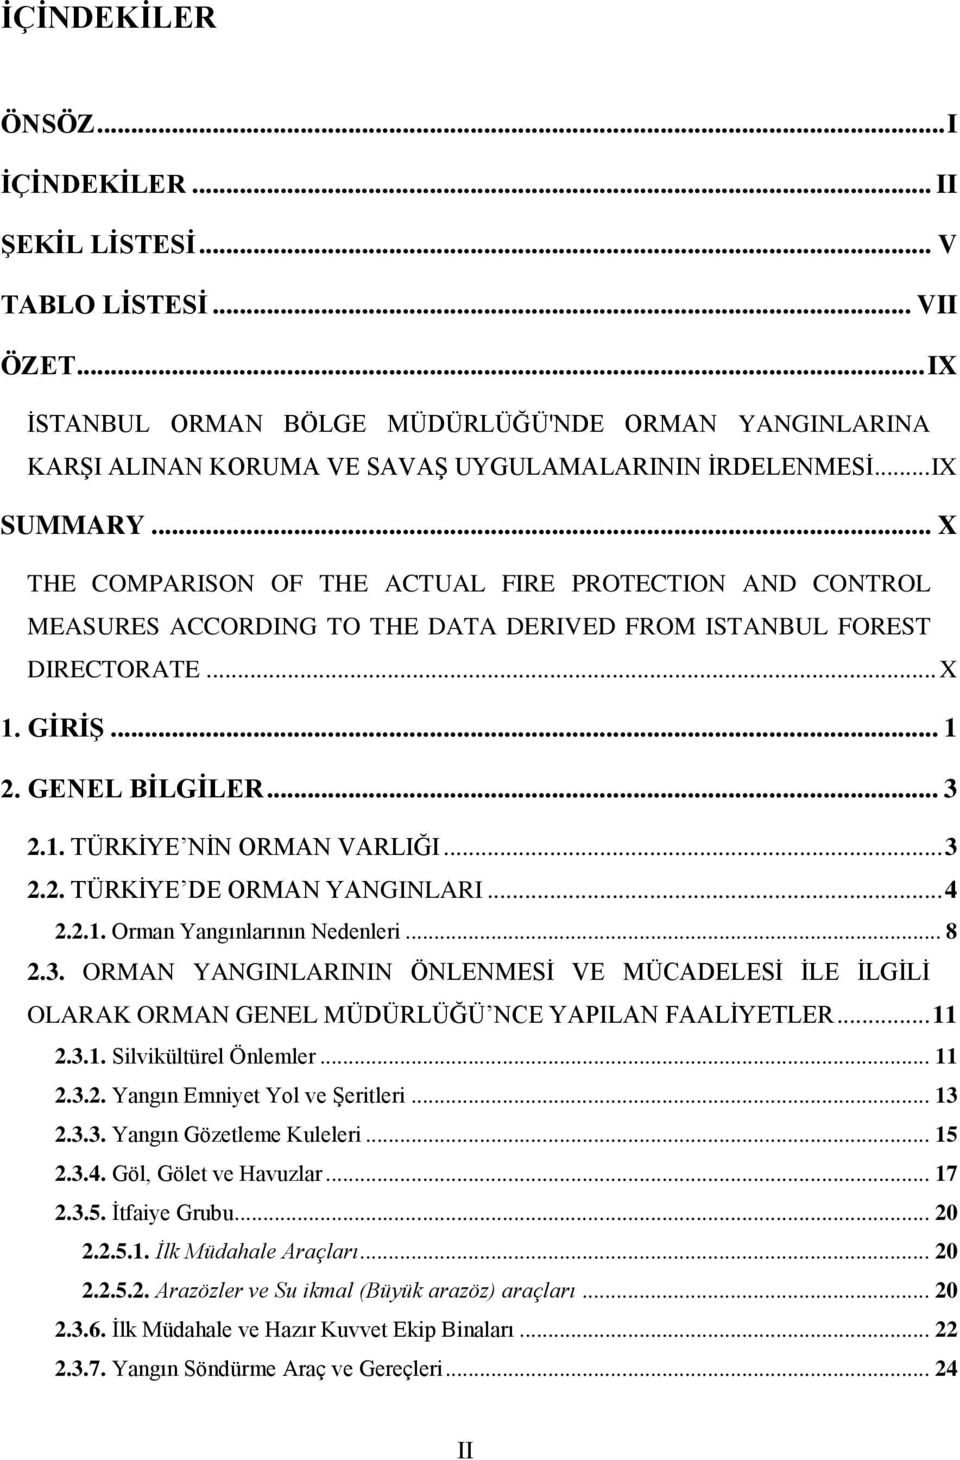 .. X THE COMPARISON OF THE ACTUAL FIRE PROTECTION AND CONTROL MEASURES ACCORDING TO THE DATA DERIVED FROM ISTANBUL FOREST DIRECTORATE... X 1. GİRİŞ... 1 2. GENEL BİLGİLER... 3 2.1. TÜRKİYE NİN ORMAN VARLIĞI.